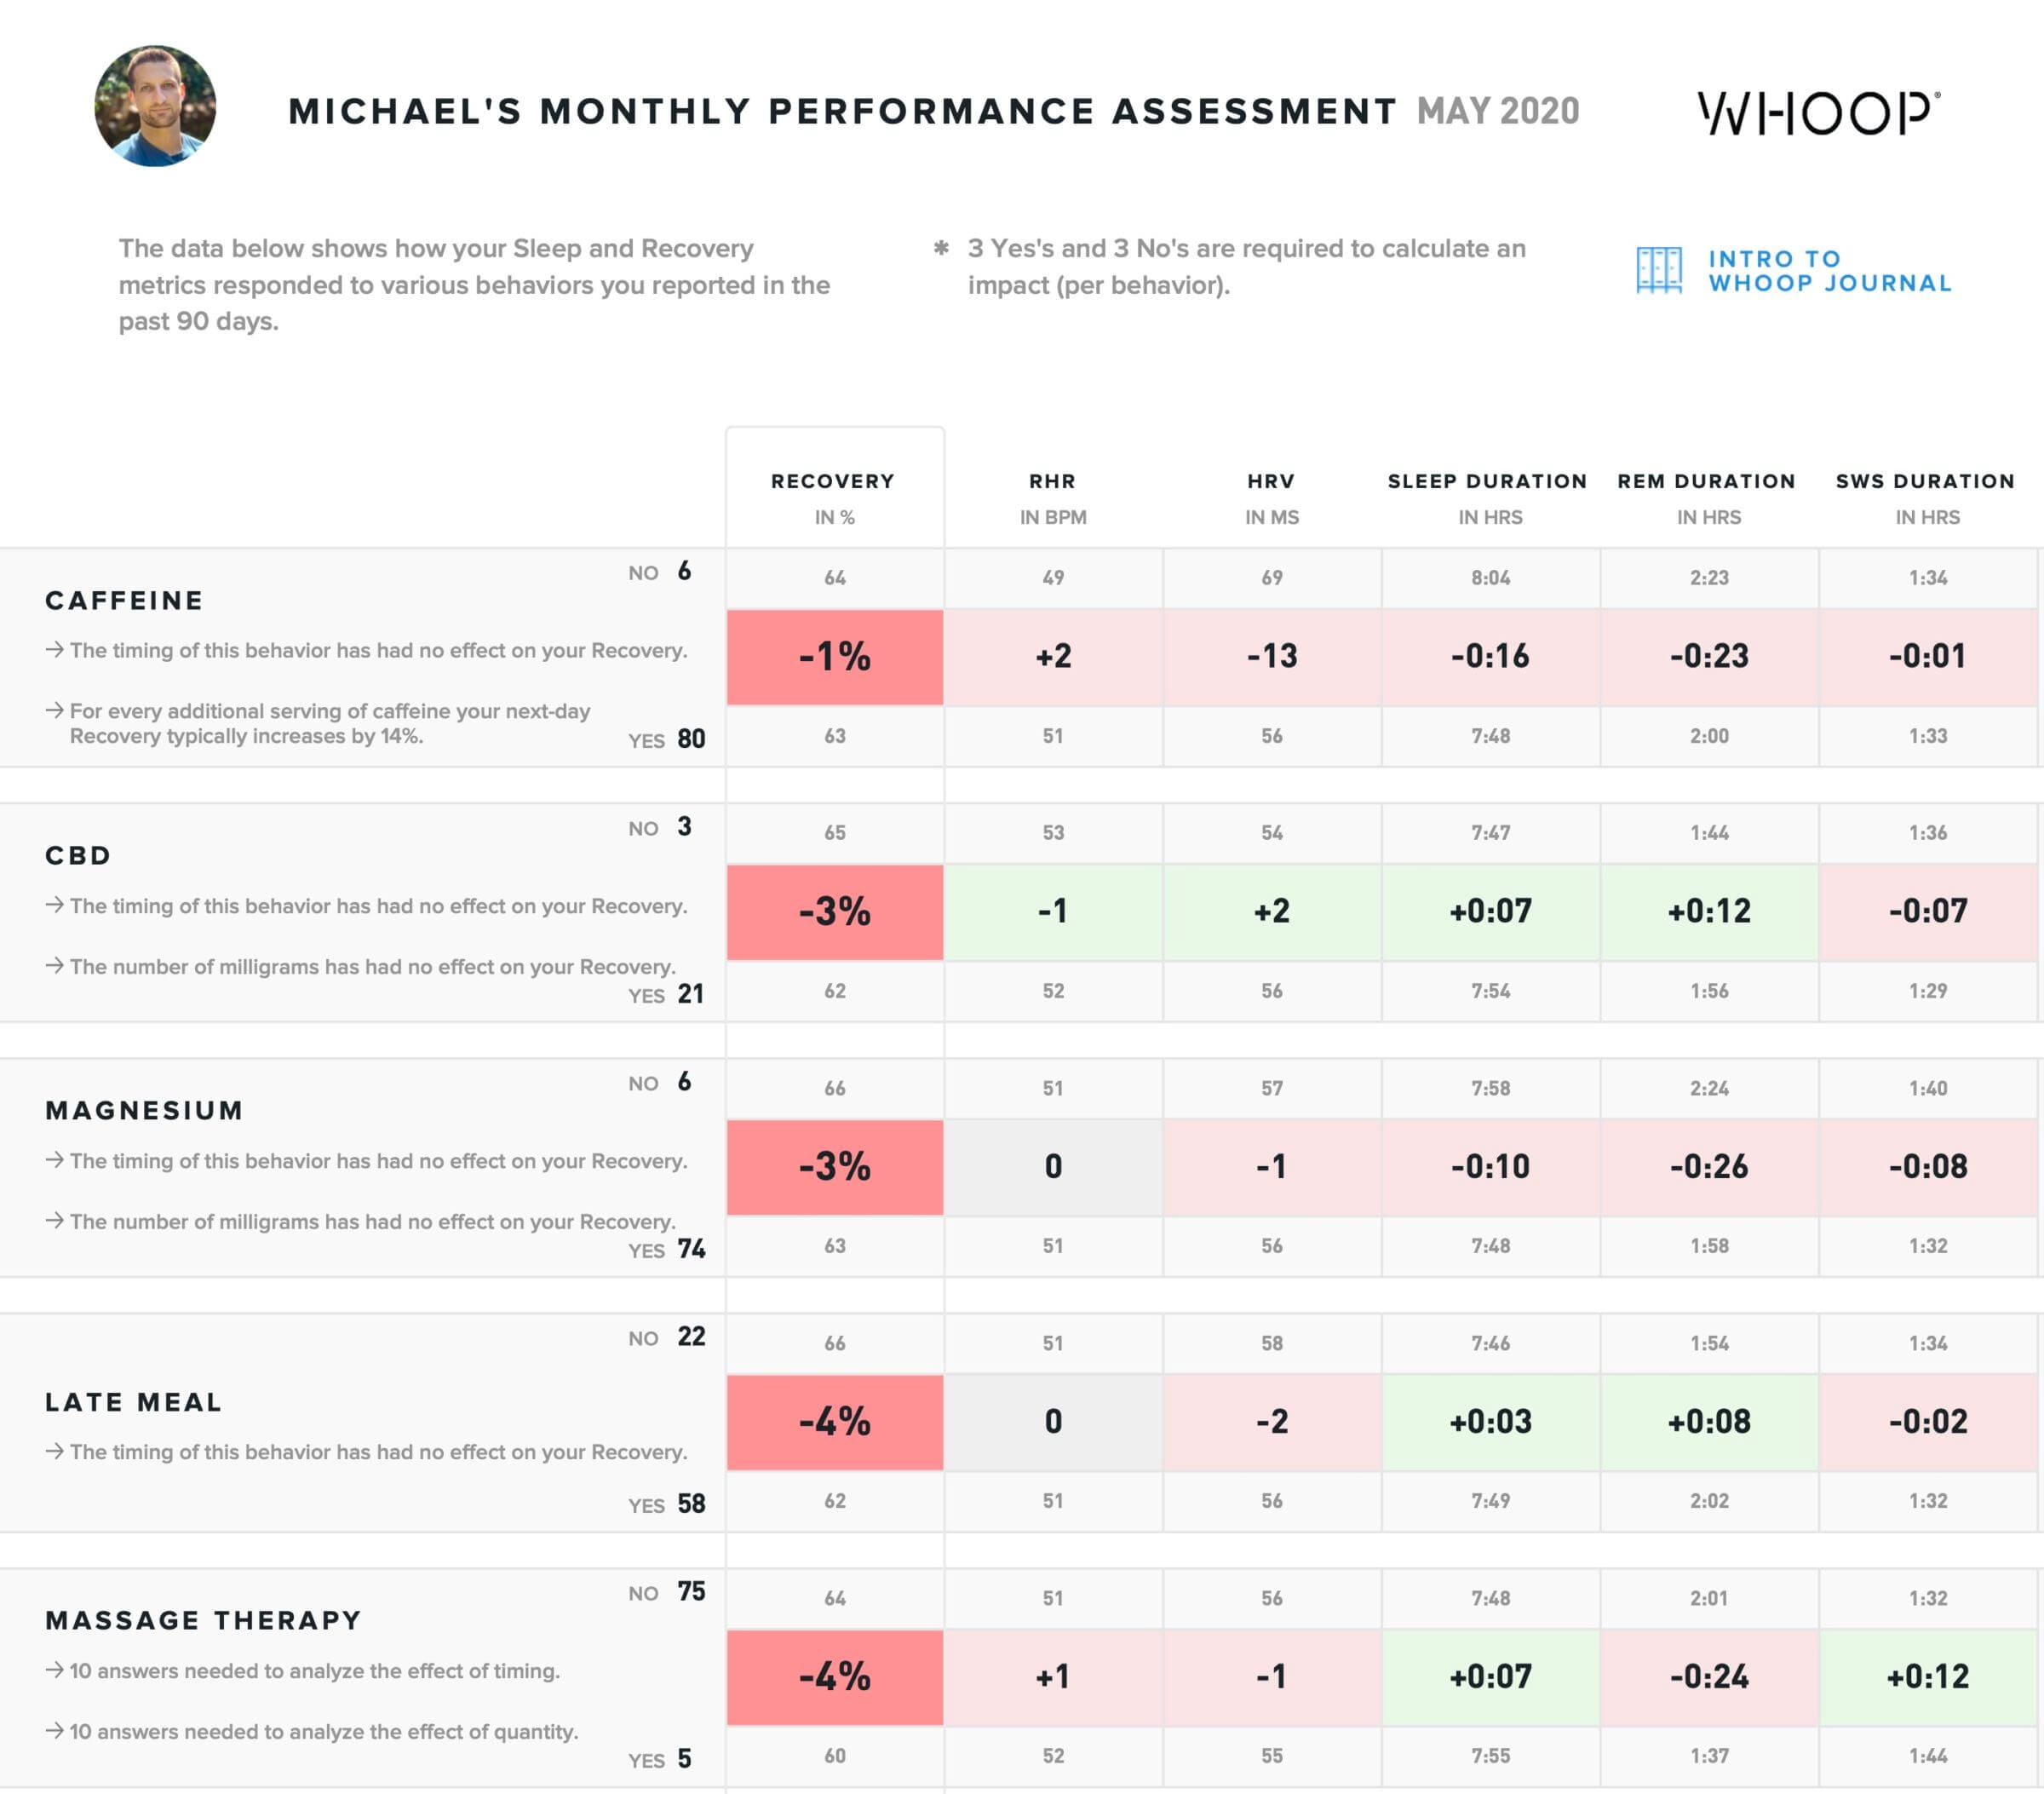 WHOOP - Performance Assessment